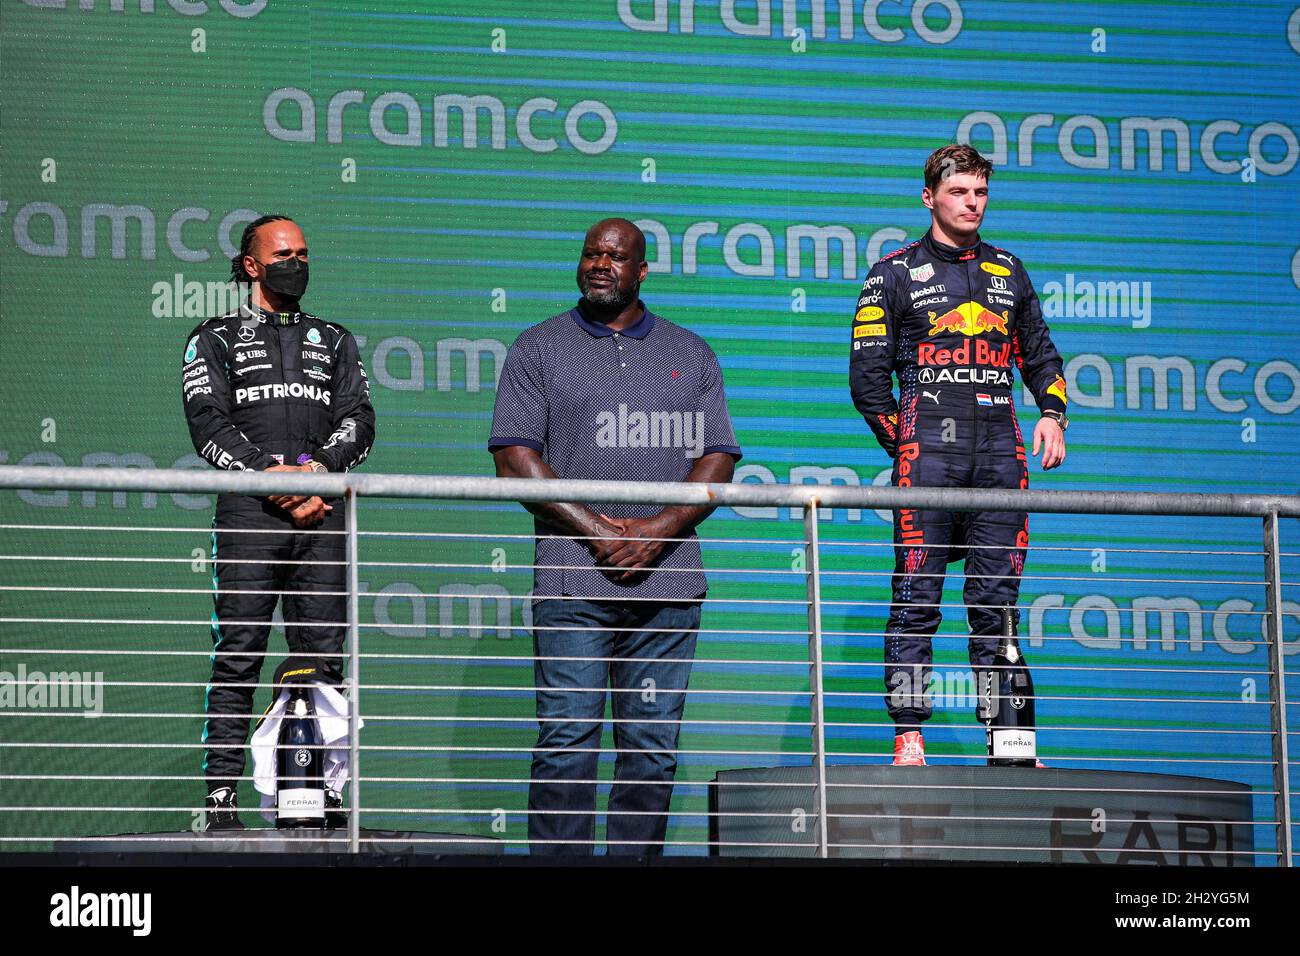 Austin, Texas, 24/10/2021, Podium: HAMILTON Lewis (gbr), Mercedes AMG F1 GP  W12 E Performance, VERSTAPPEN Max (ned), Red Bull Racing Honda RB16B, and  Shaquille O'Neal during the Formula 1 Aramco United States